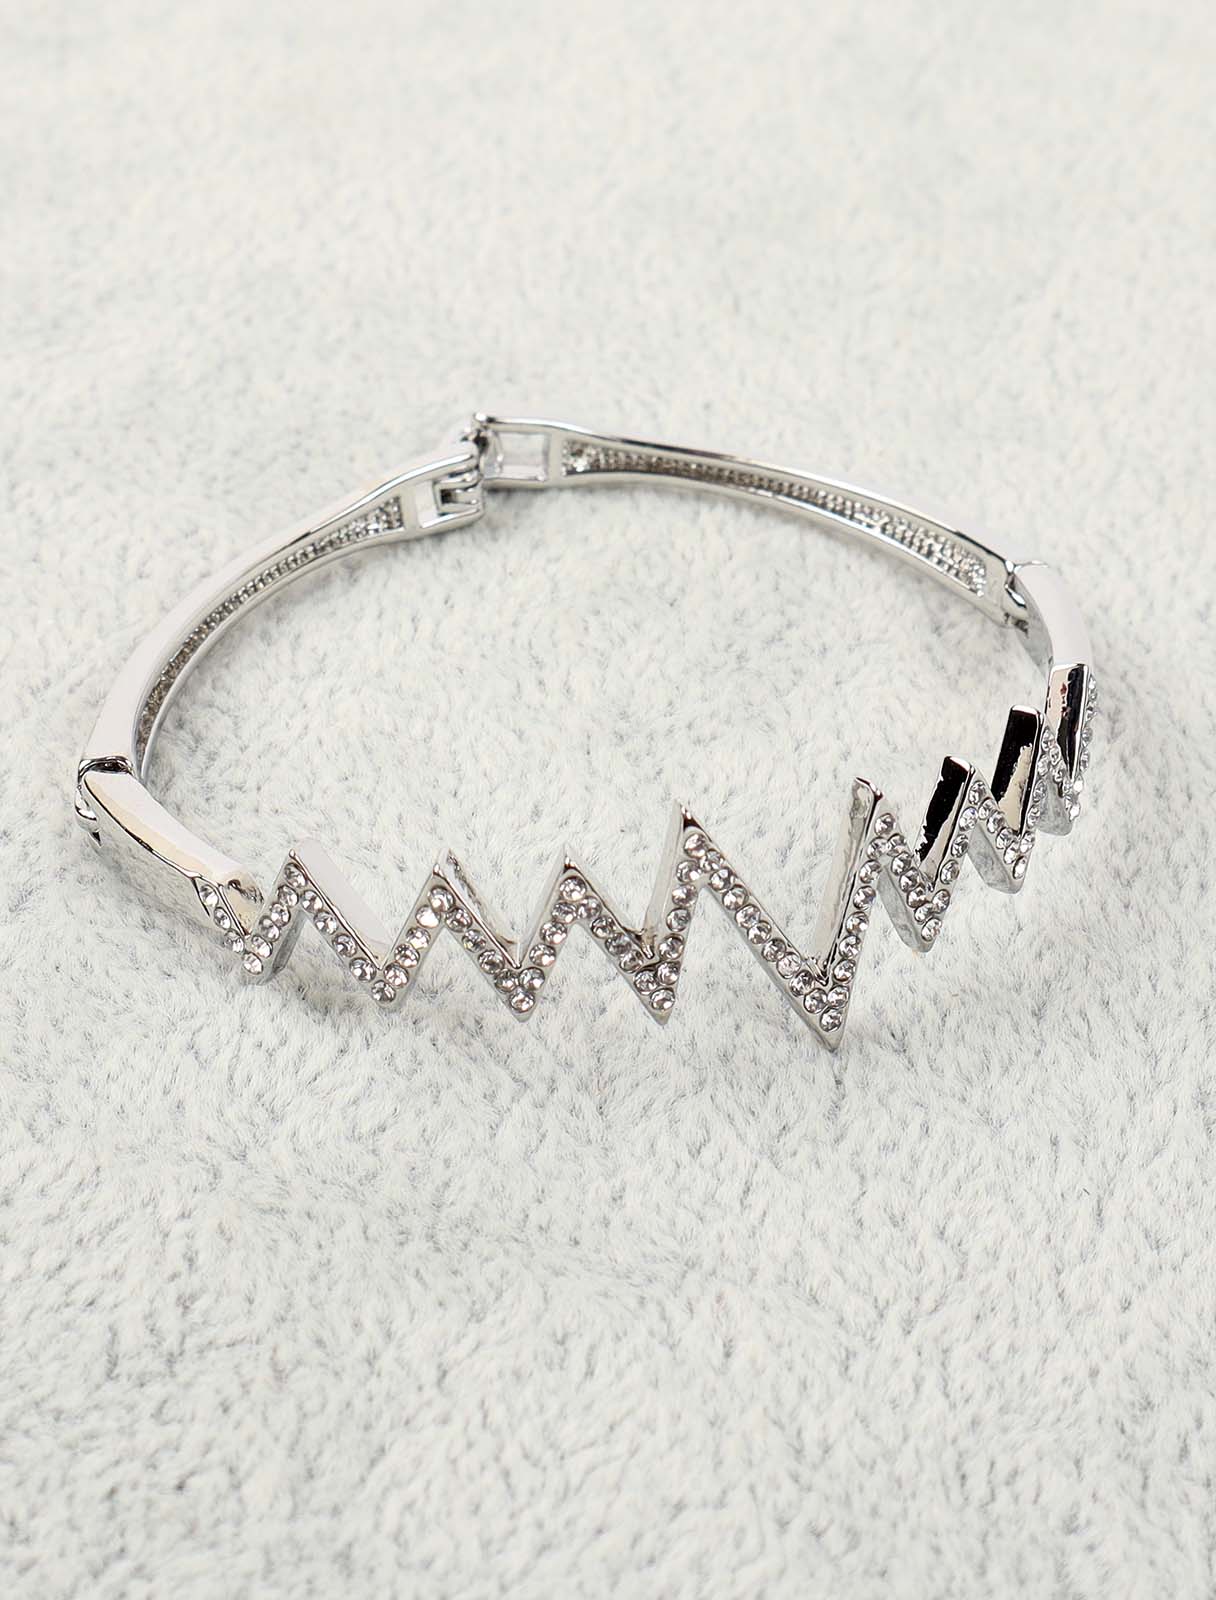 A bracelet in the form of a zigzag decorated with crystals